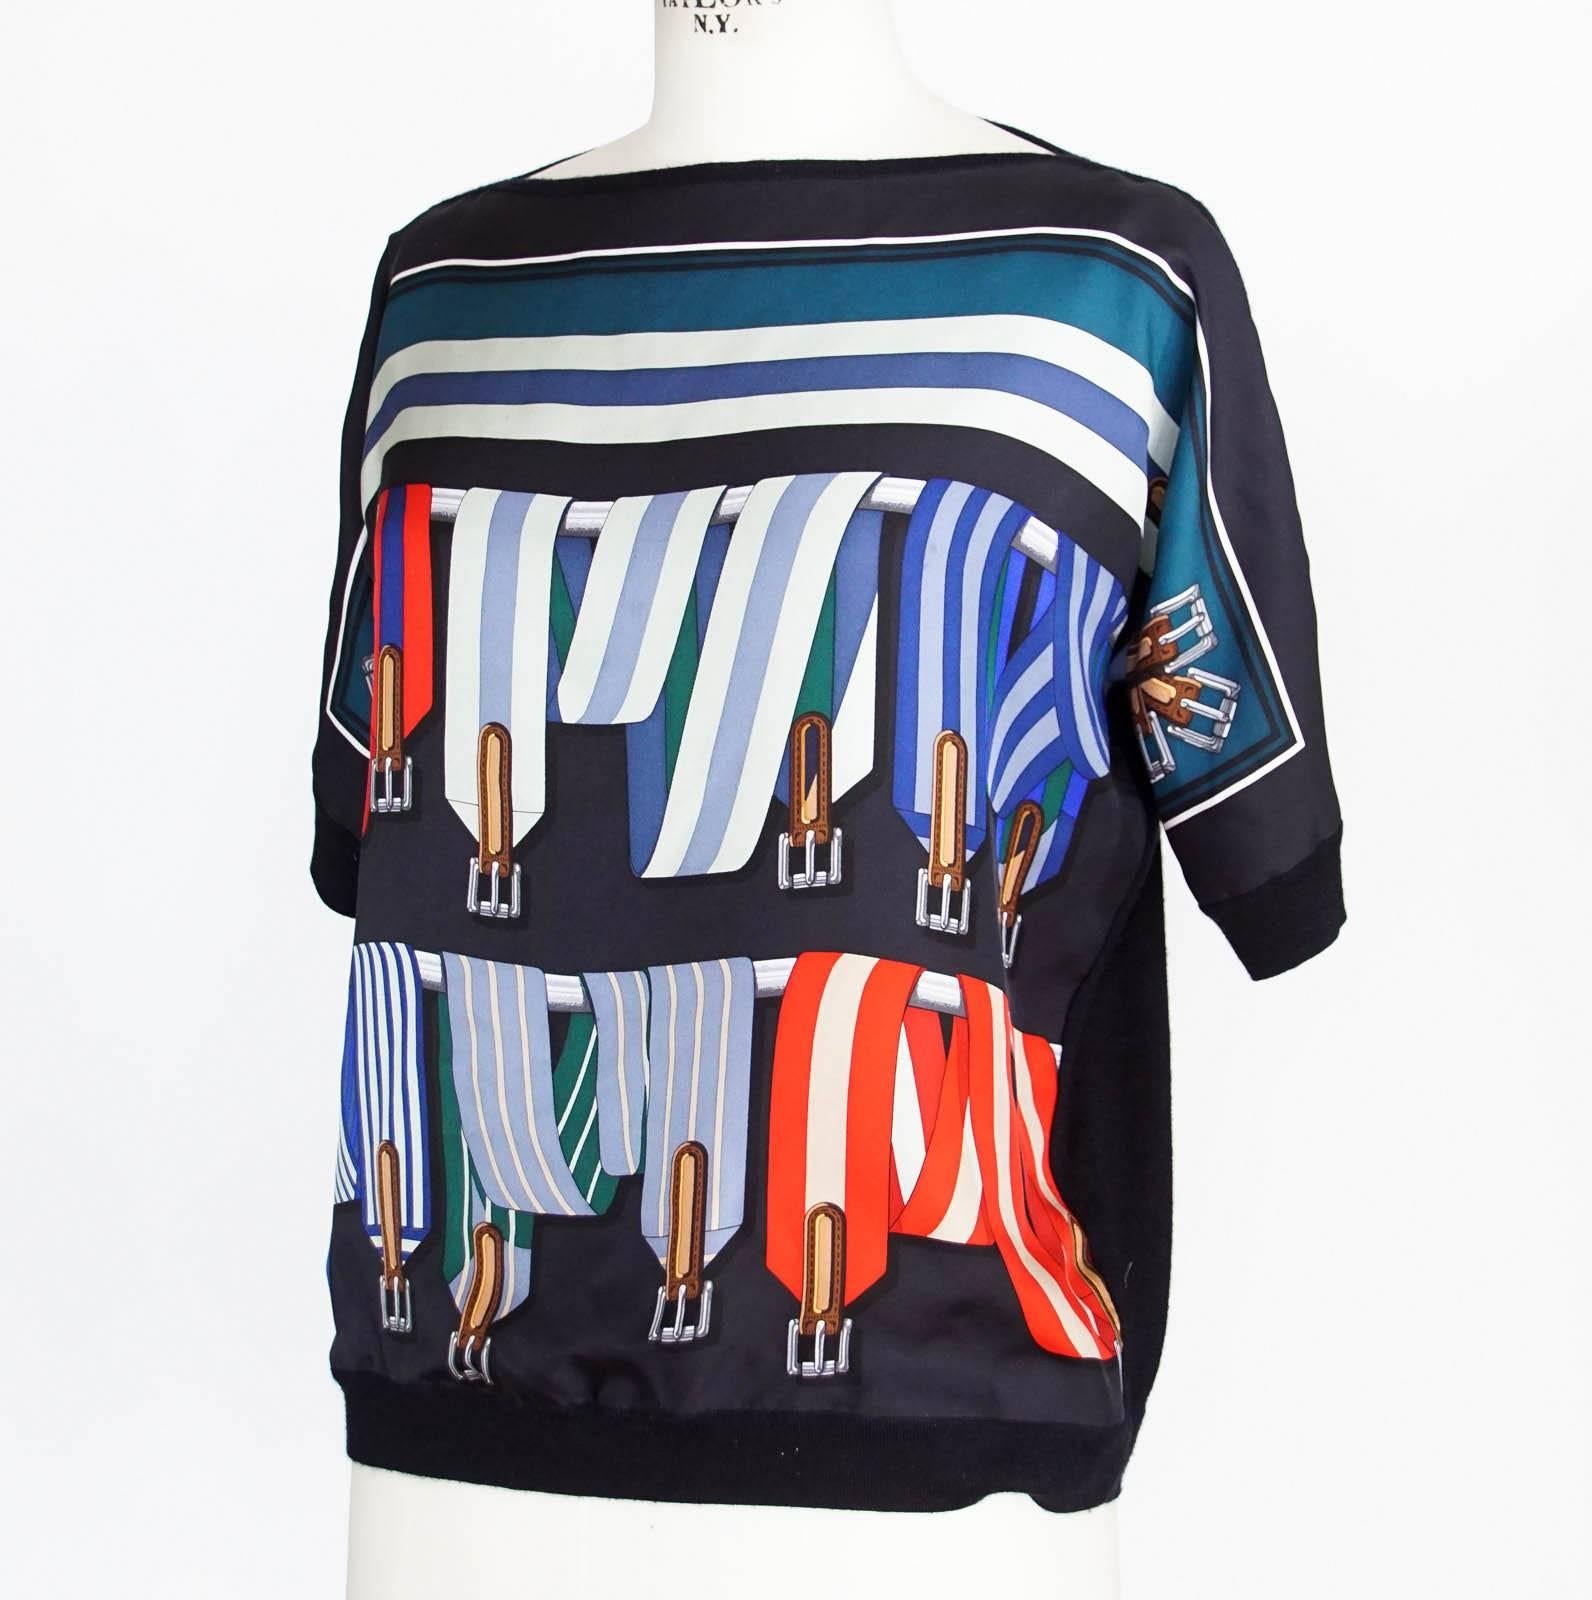 Guaranteed authentic HERMES rich printed silk top.  Easily unisex.
Braces motif silk print in colorful stripes.
The rear is a fine cashmere in dark navy.
Boat neck collar with ribbing around short sleeves and bottom.
Fabric is silk cashmere.
Small